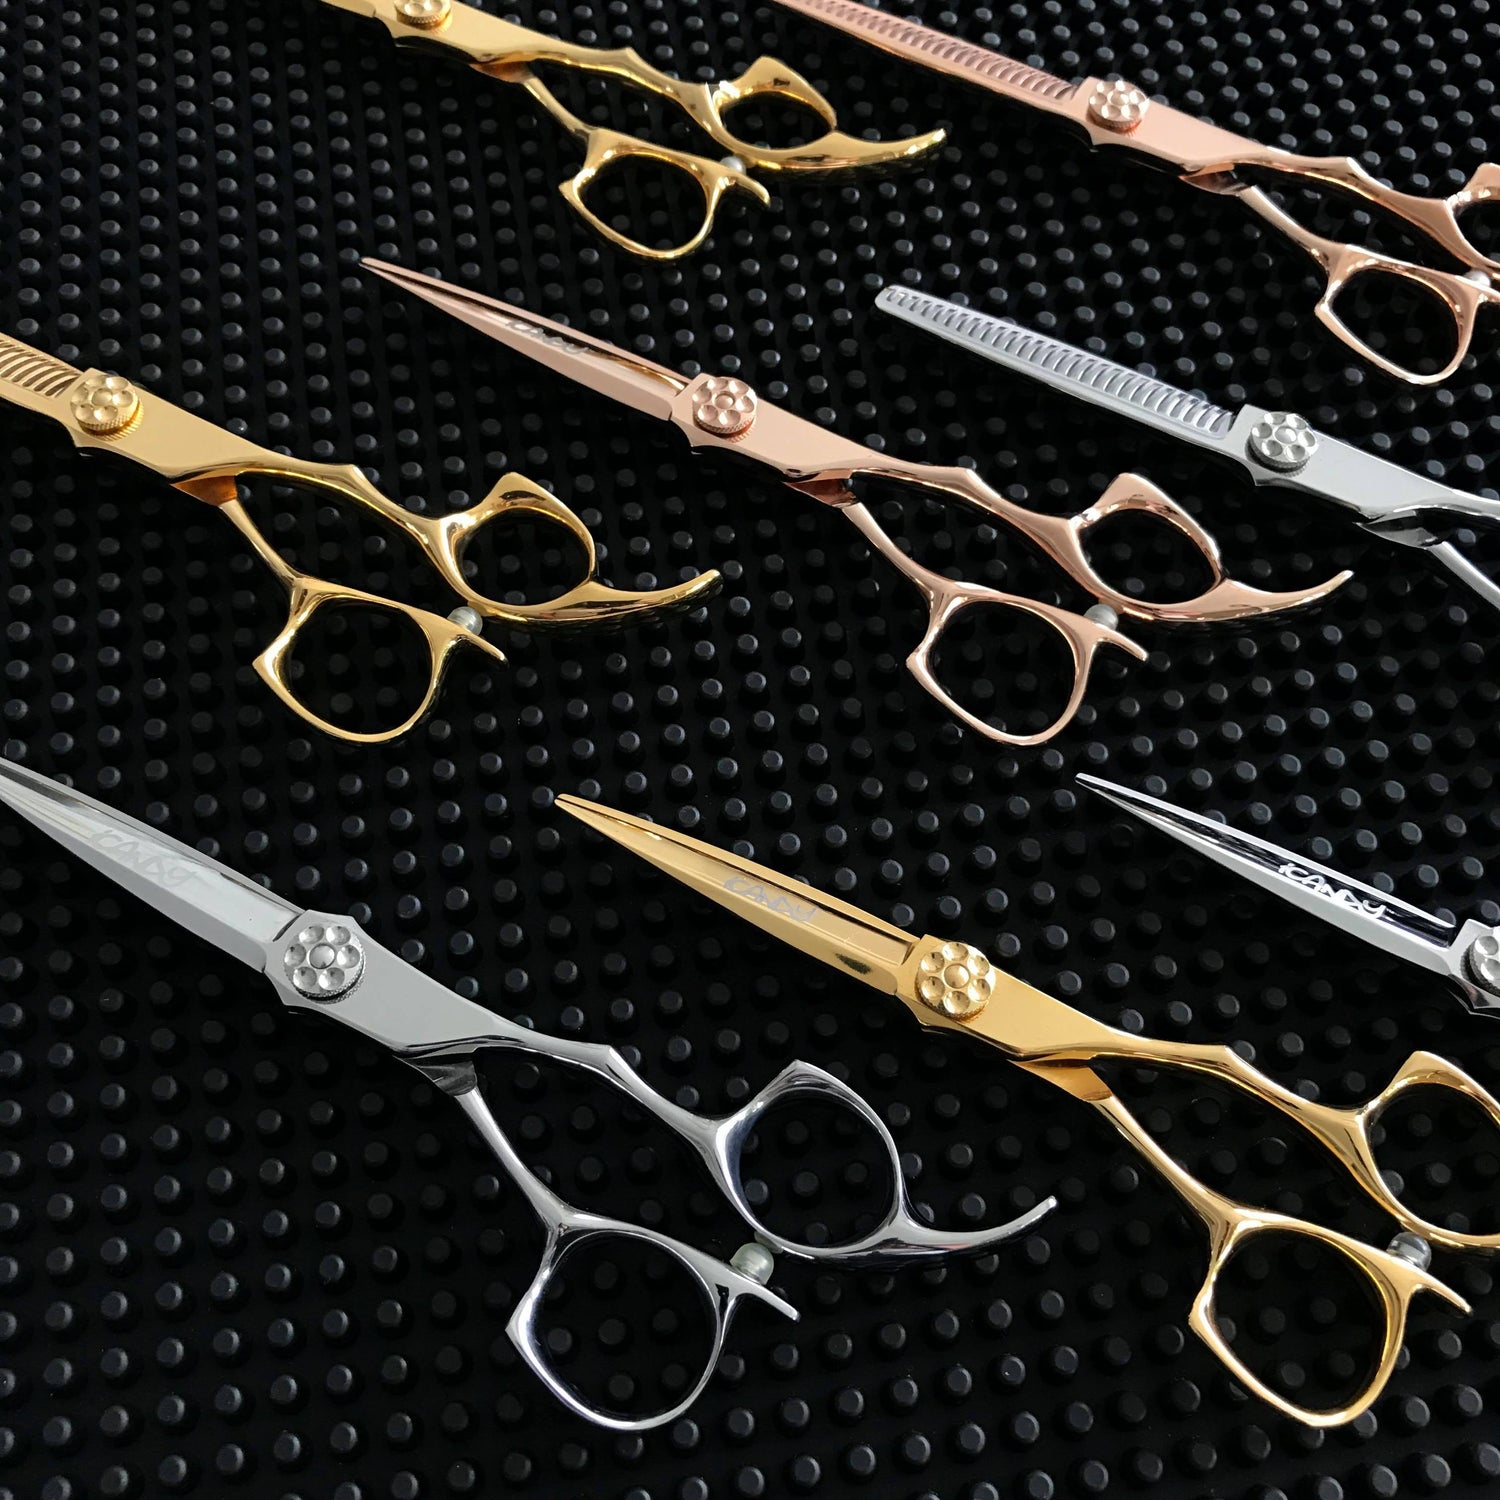 Cutting Edge: Barber Temple's top 5 things to consider when buying Barber Scissors